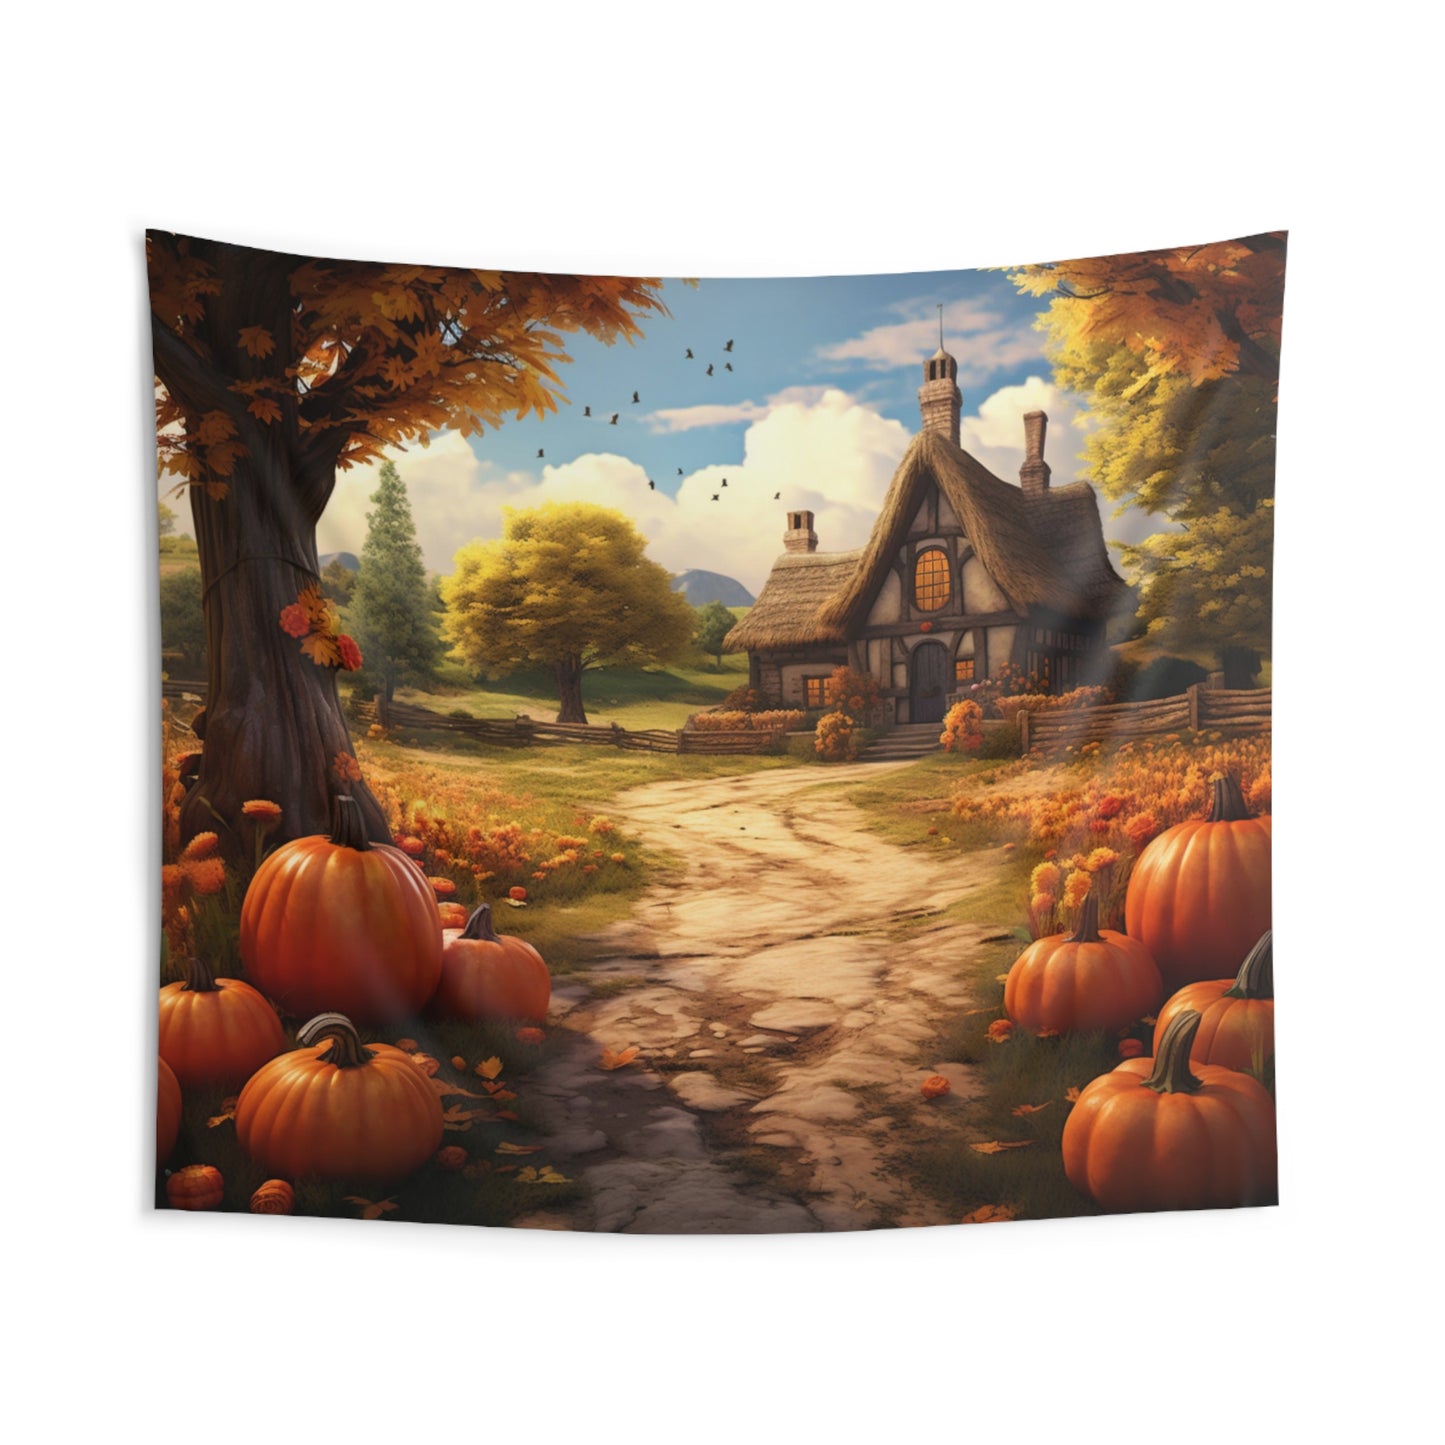 Pumpkin Patch Tapestry, Fall Autumn Leaves Cottage Wall Art Hanging Unique Landscape Aesthetic Large Small Bedroom College Dorm Room Starcove Fashion